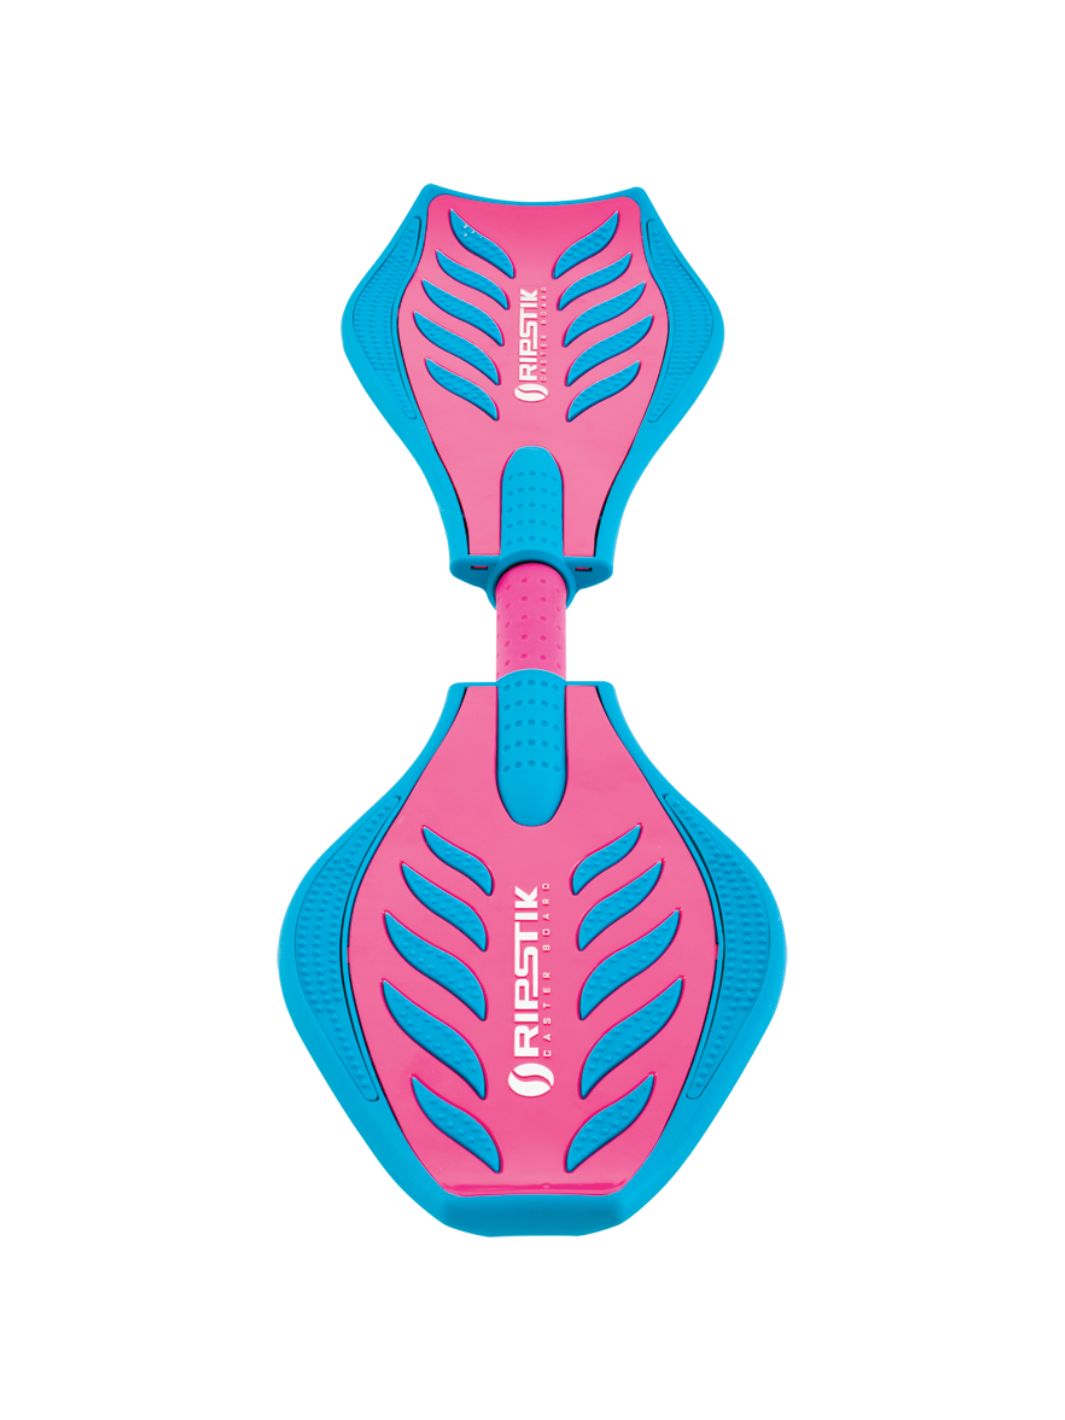 RipStik Ripster Brights - Pink/Blue